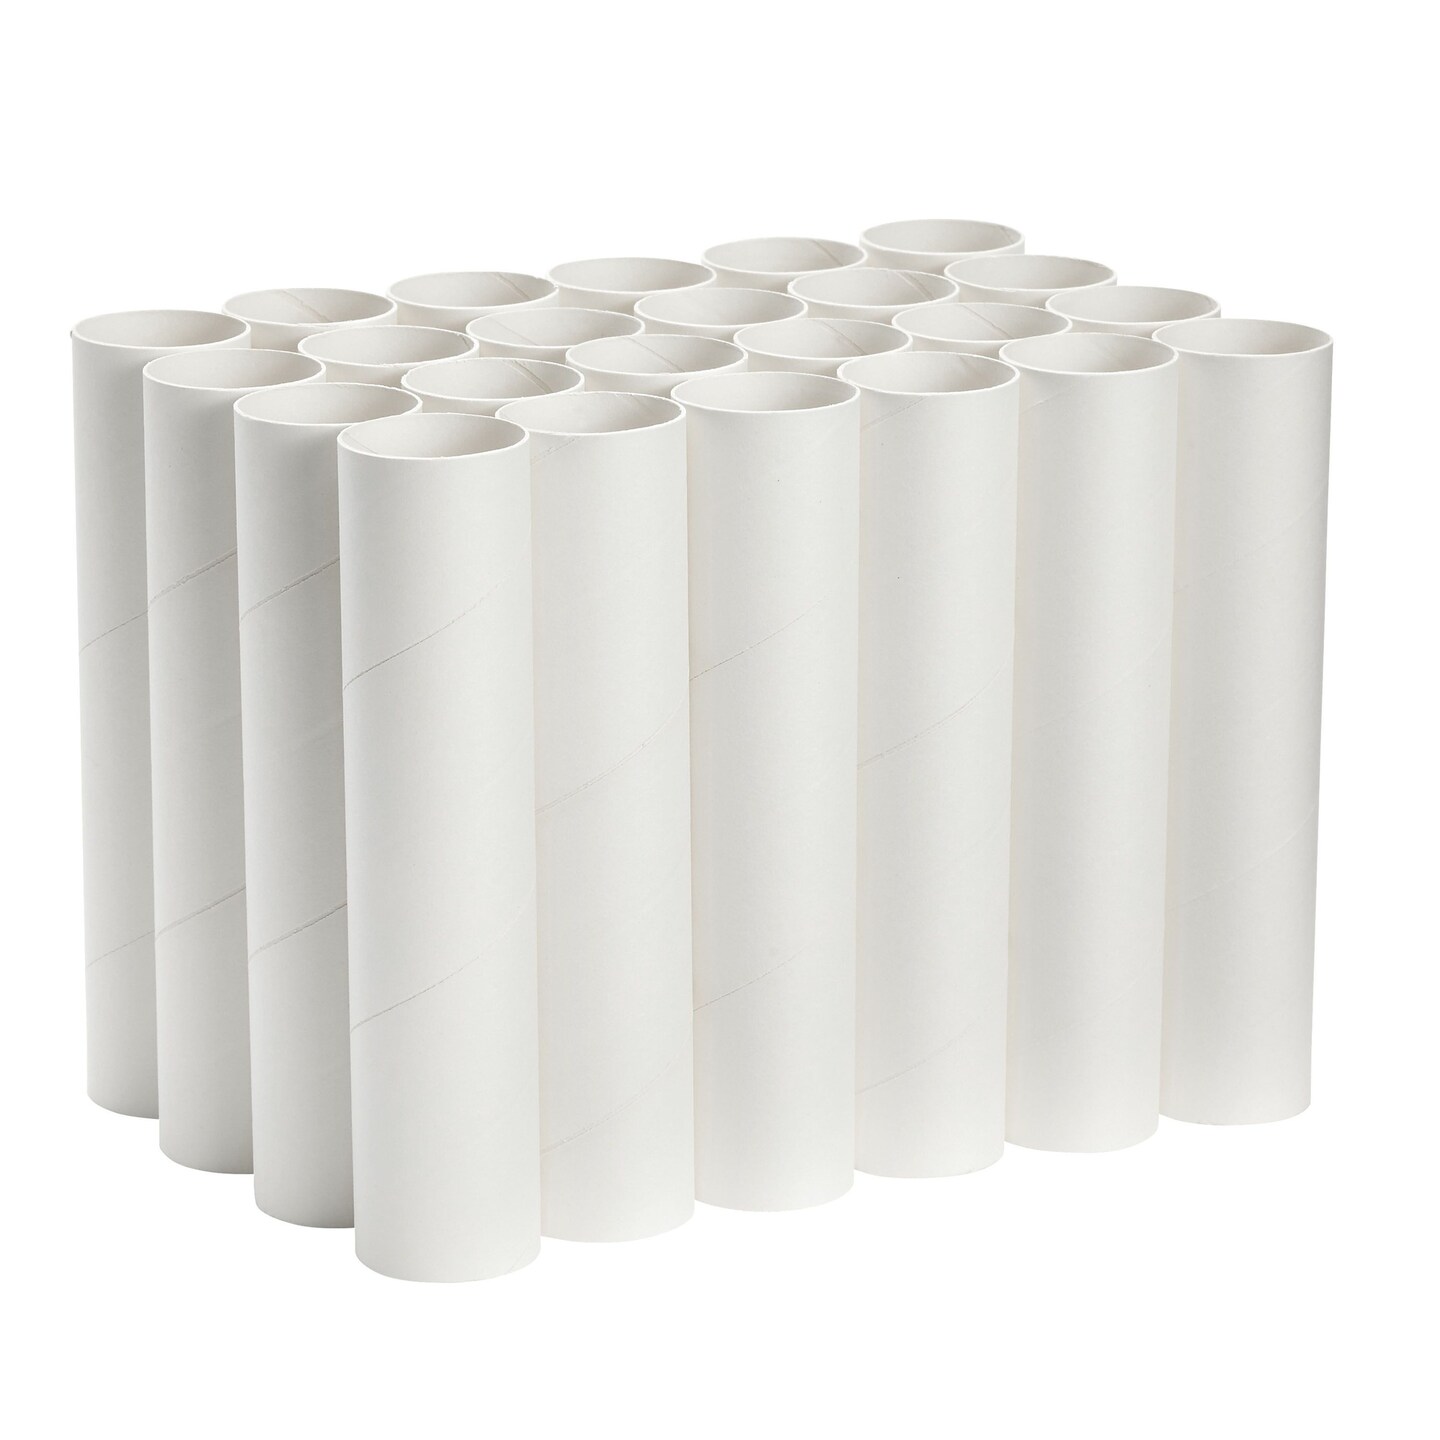 White Cardboard Tubes for Crafts (1.75 x 8 In, 24 Pack)